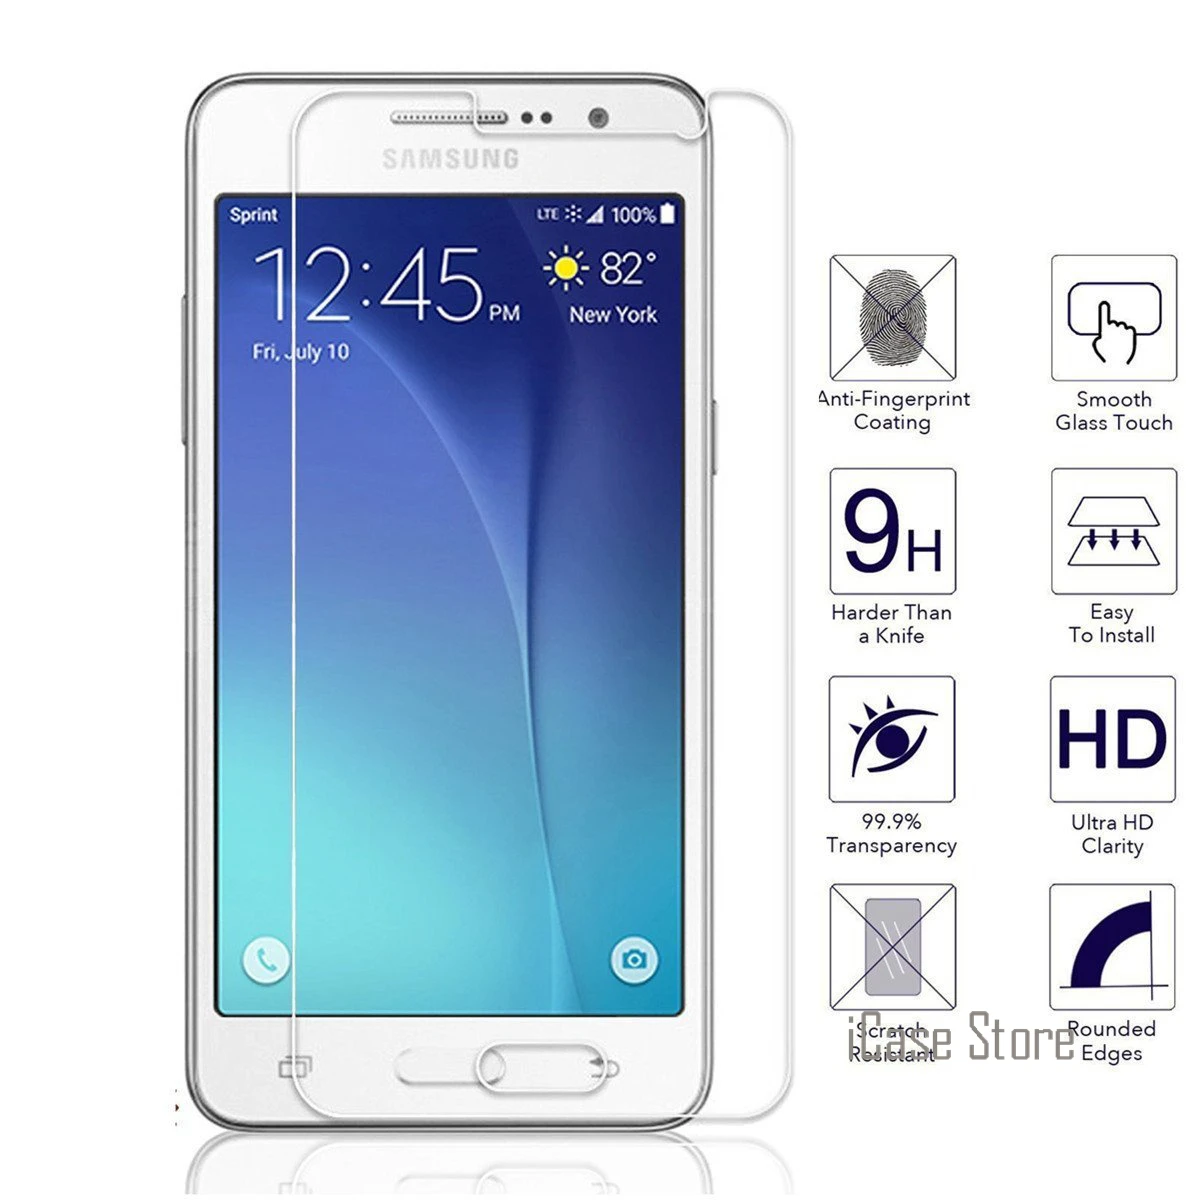 

Tempered Glass For Samsung Galaxy S3 S4 S5 NEO S6 J7 J5 J3 J1 2016 Core J2 Prime G360 G361F Grand Prime VE G530 G531F G531H